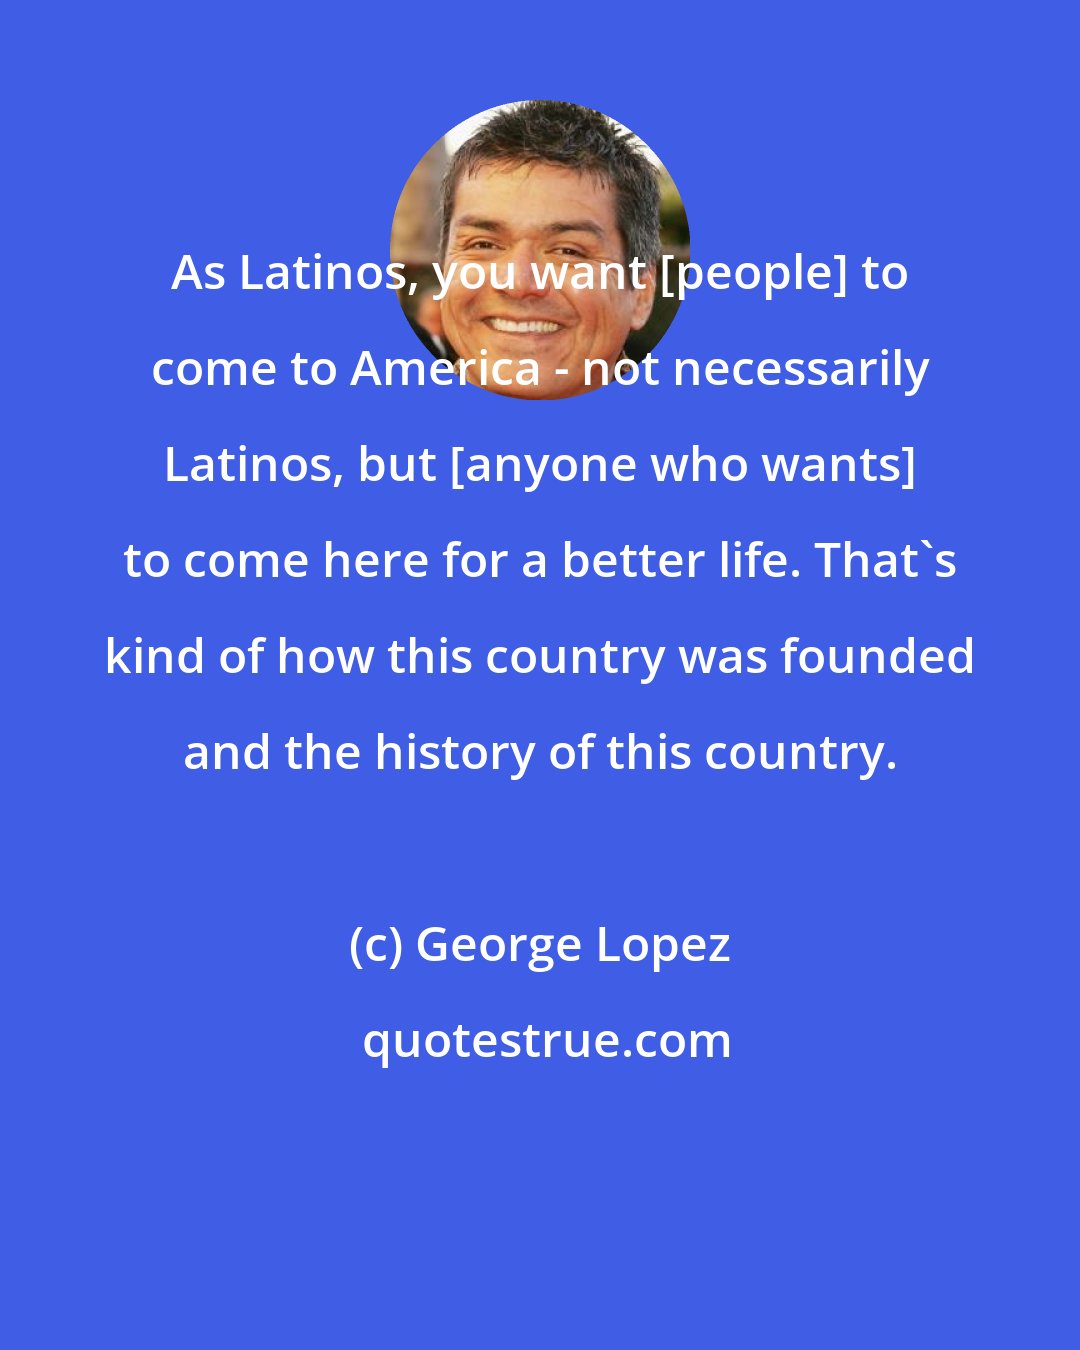 George Lopez: As Latinos, you want [people] to come to America - not necessarily Latinos, but [anyone who wants] to come here for a better life. That's kind of how this country was founded and the history of this country.